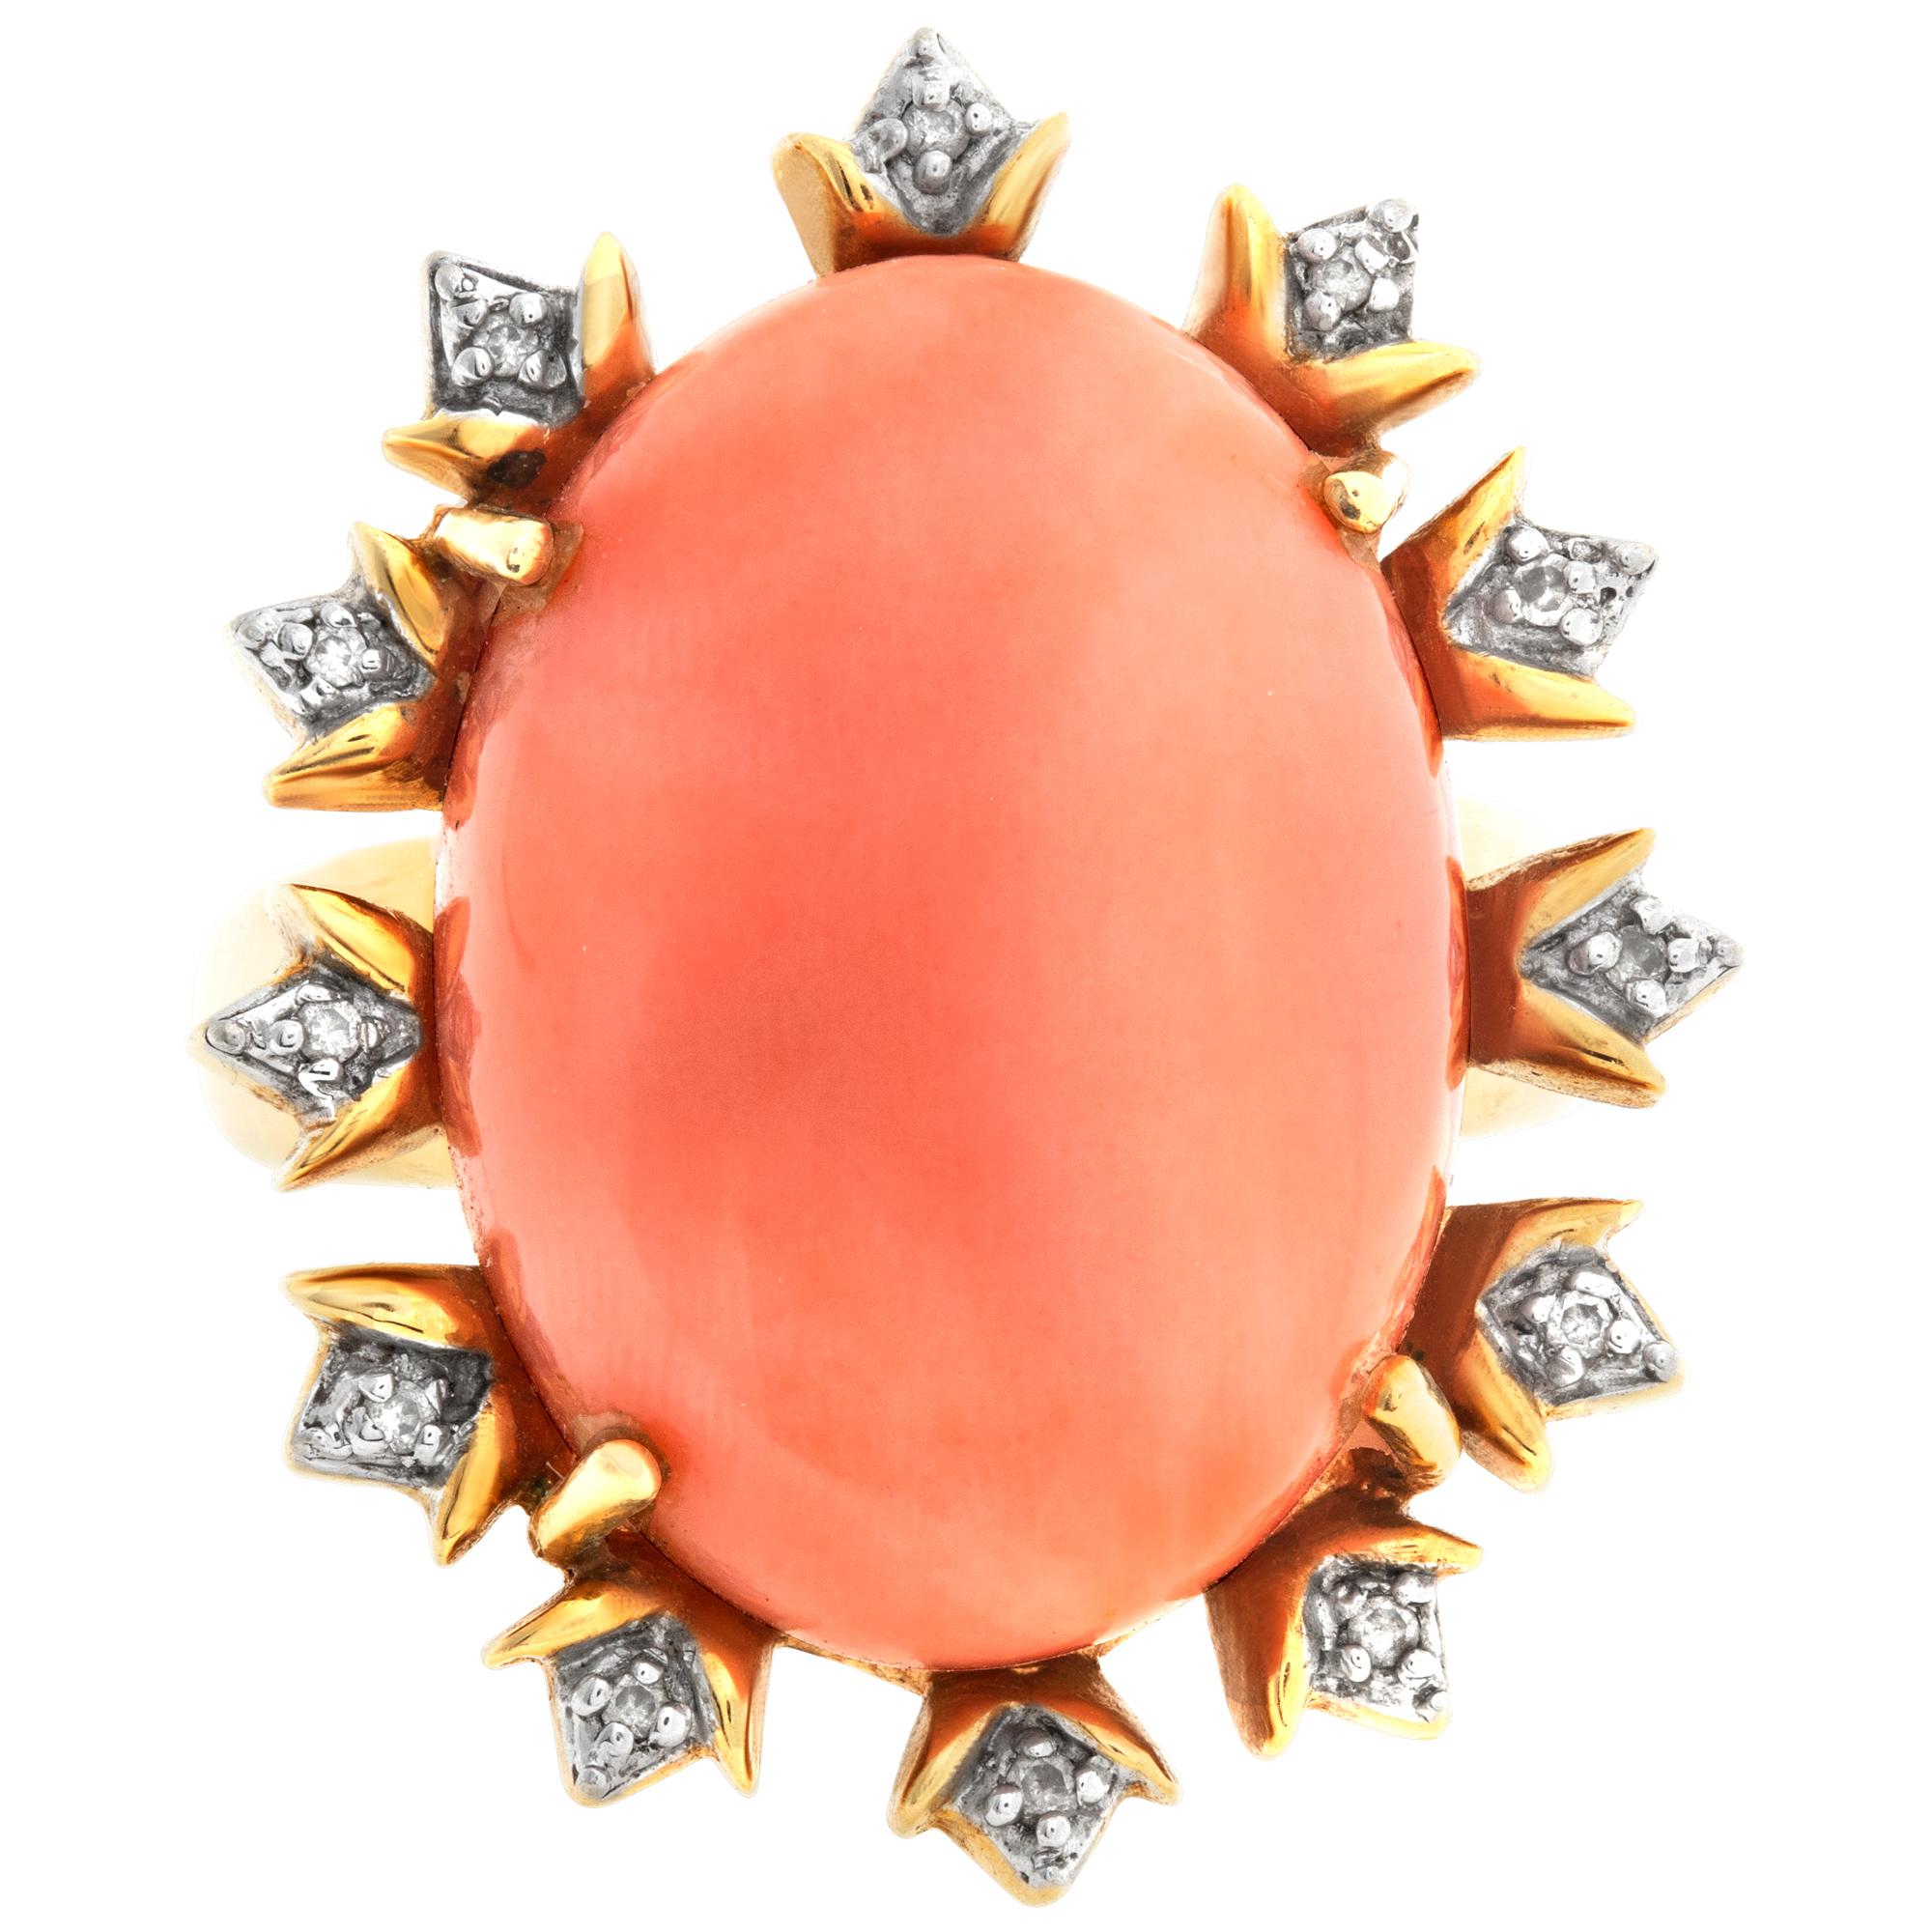 Peachy Keen coral ring in 18k yellow gold with diamond accent frame. Size 7, head measures 22mm x 27mm, shank 2mm thick.This coral ring is currently size 7 and some items can be sized up or down, please ask! It weighs 7.5 pennyweights and is 18k